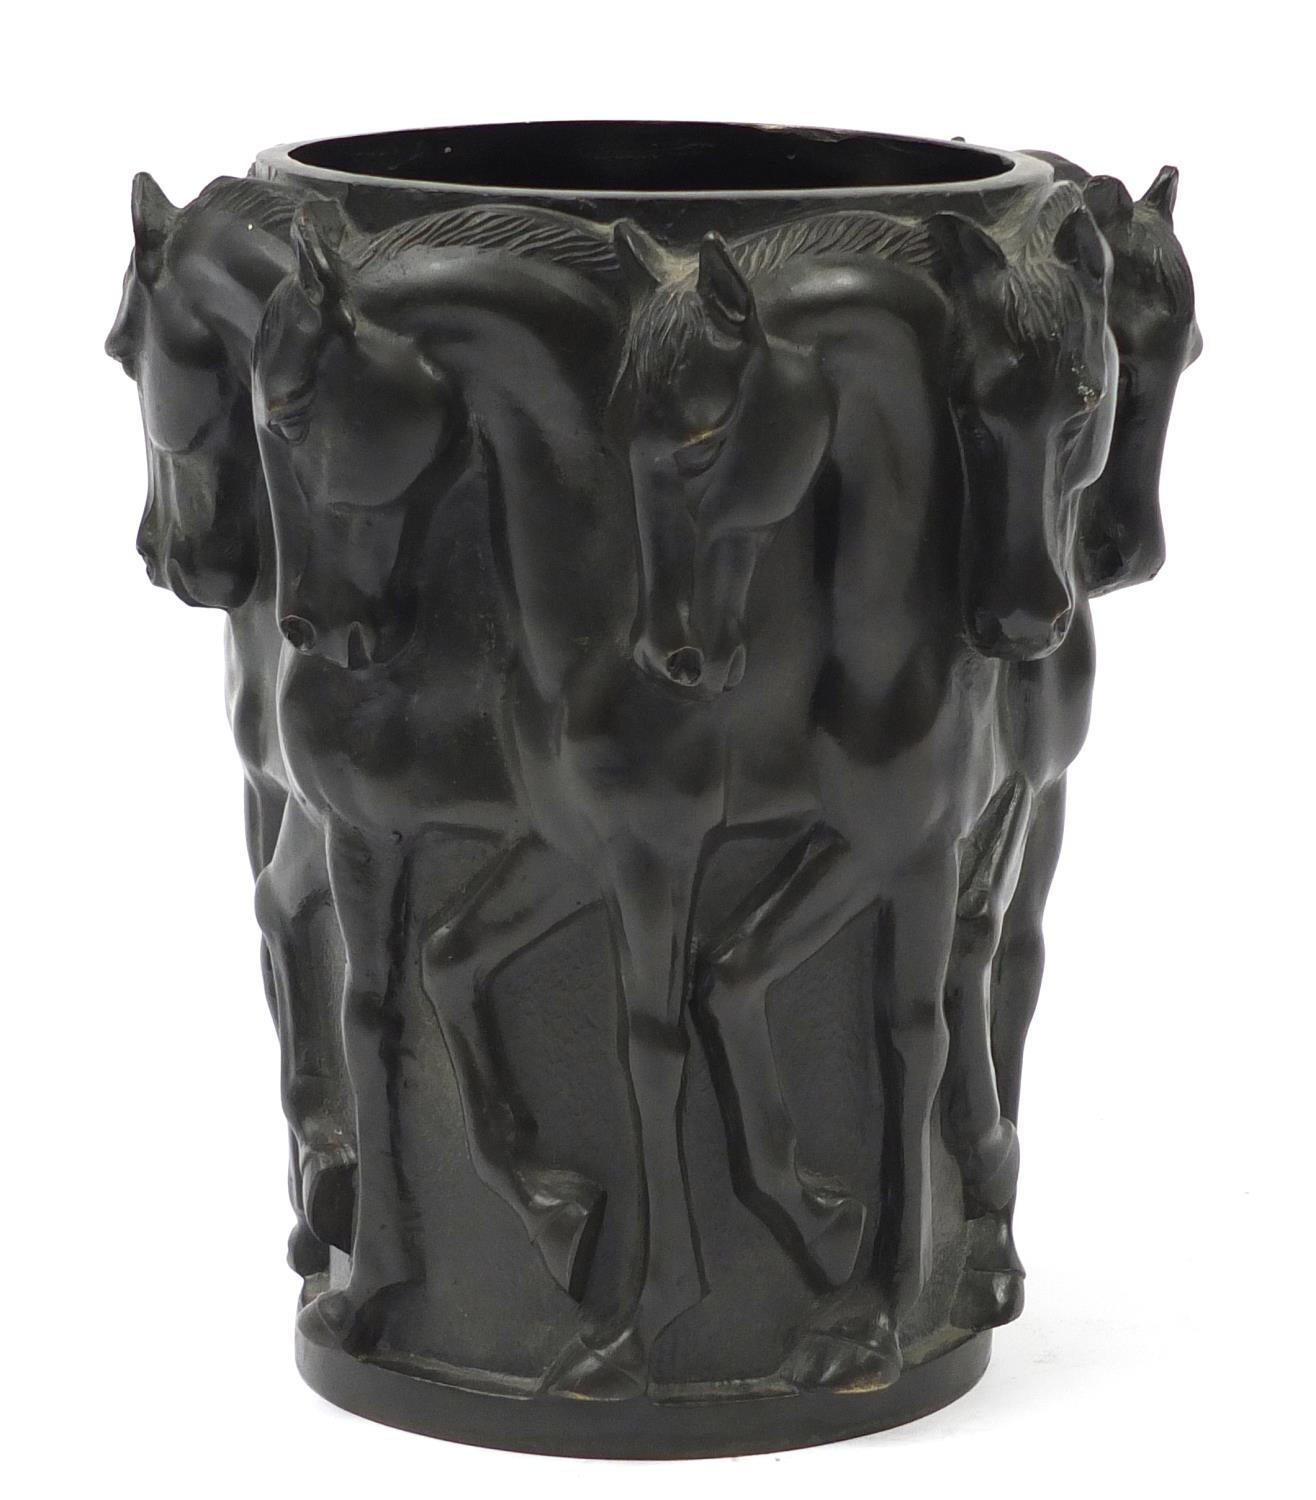 French Art Deco patinated bronze Maharajah thoroughbred wine cooler cast with a continuous band of - Image 3 of 8